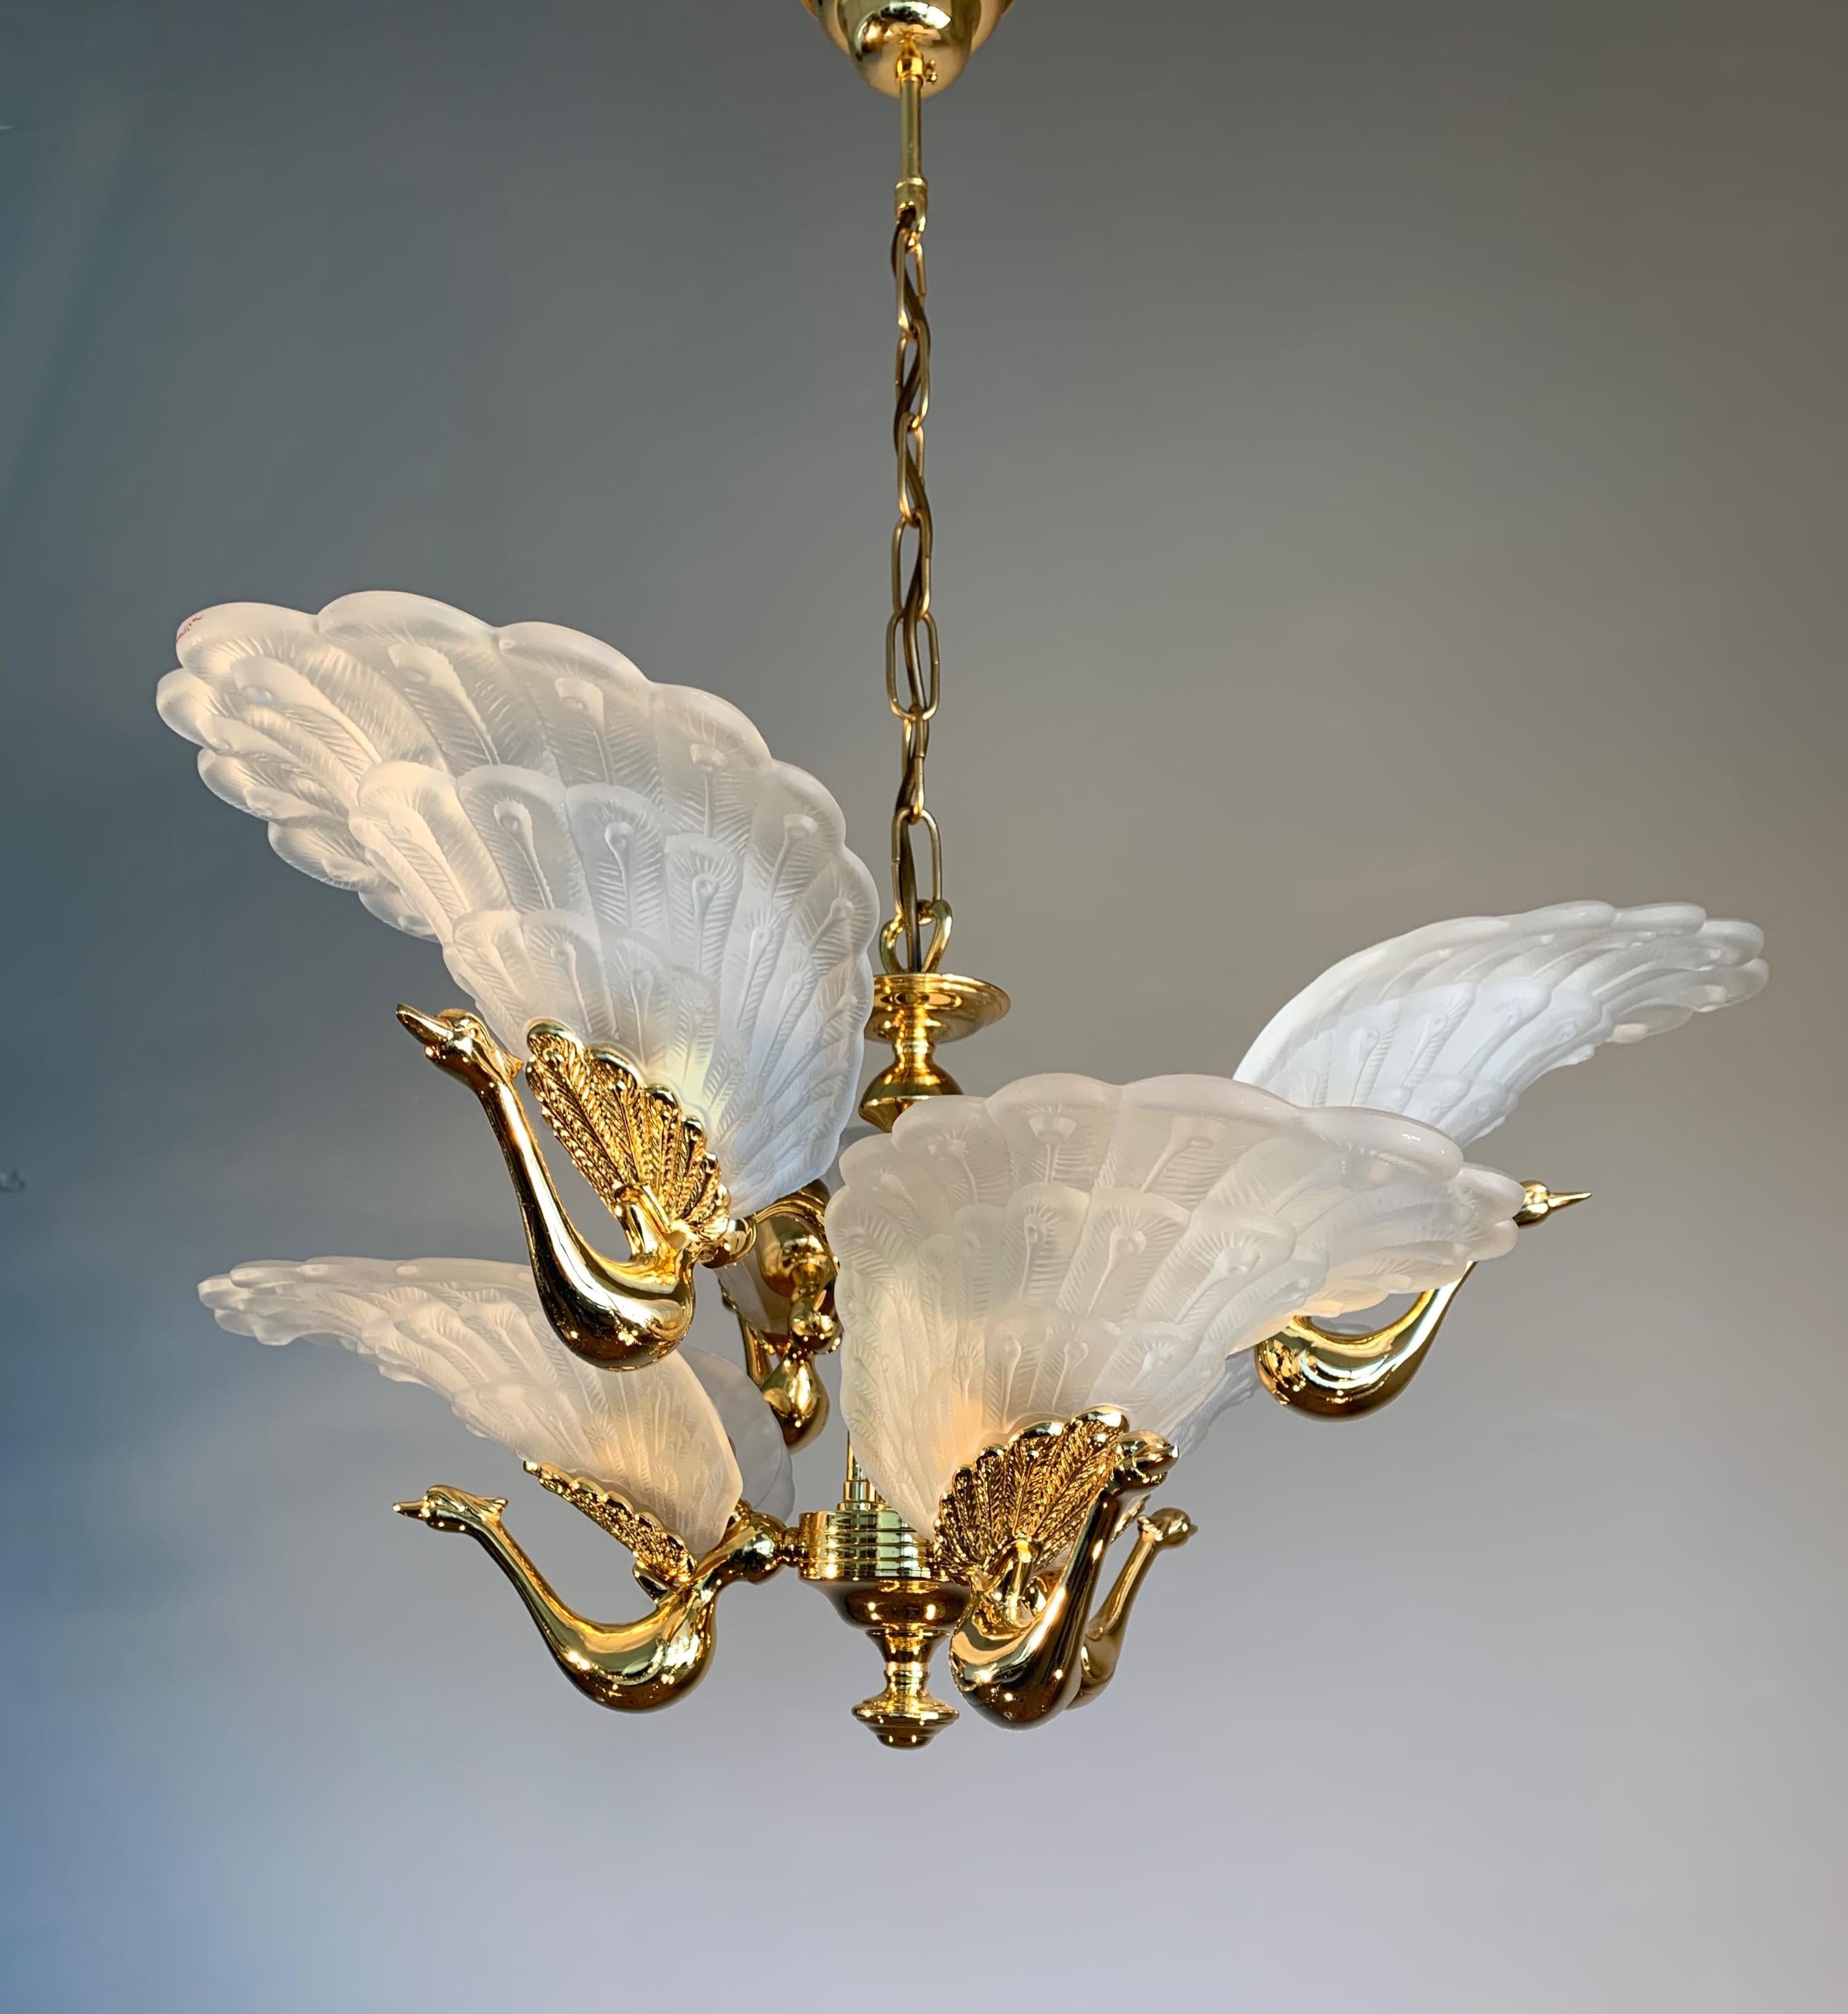 Sculptural and highly decorative two tiers six light fixture.

The peacock has, since ancient times, been regarded as an animal with many positive and even healing characteristics. And that has inspired many artist and designers through all times